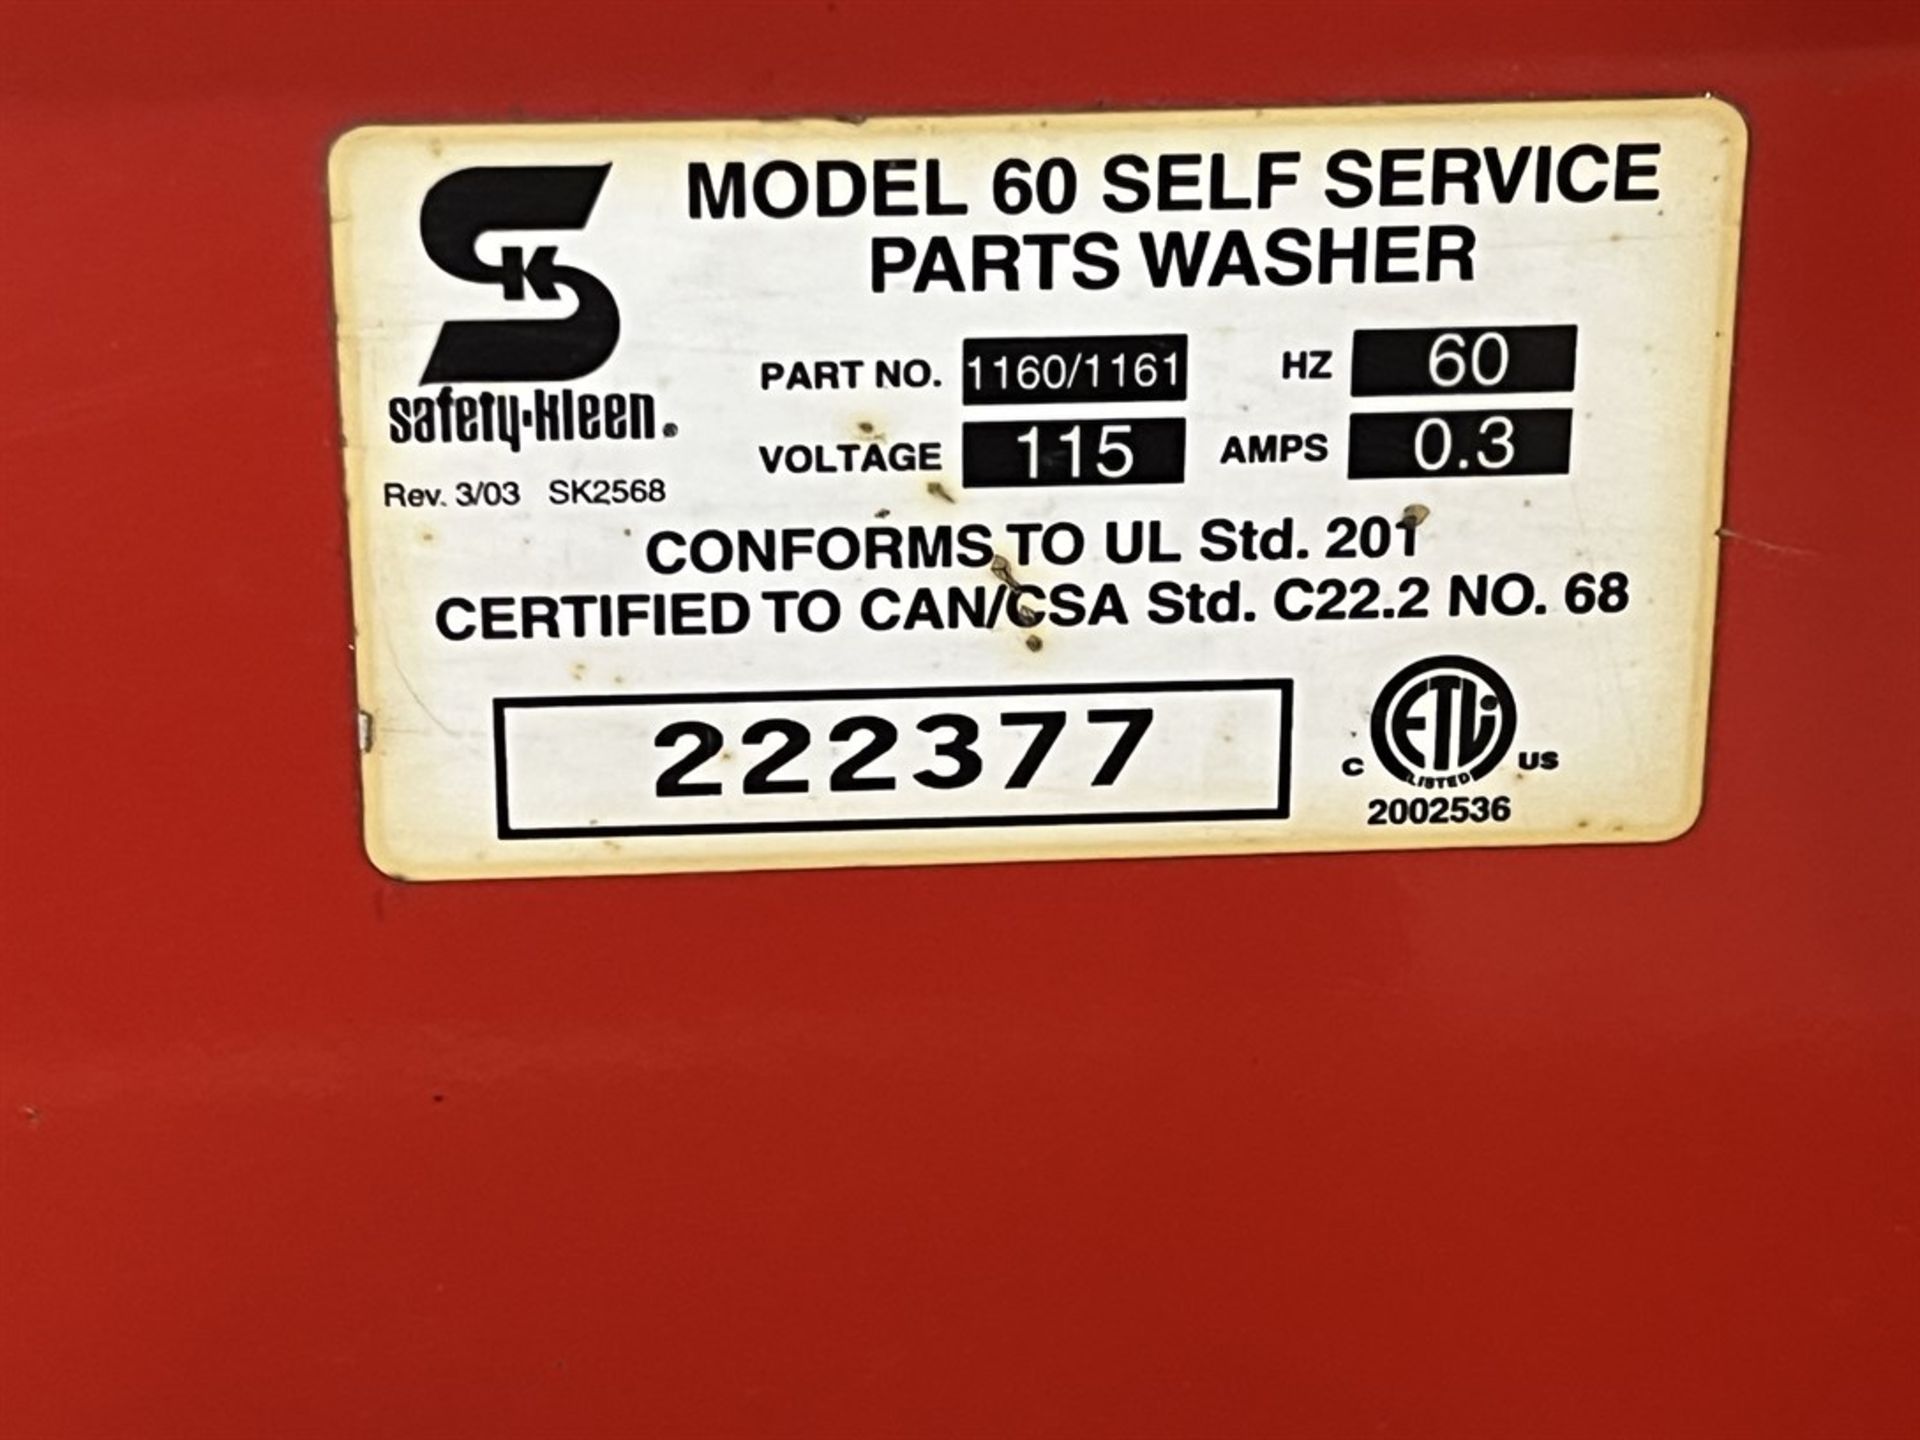 SAFETY KLEEN 60 Self Service Parts Washer, s/n 222377 - Image 4 of 4